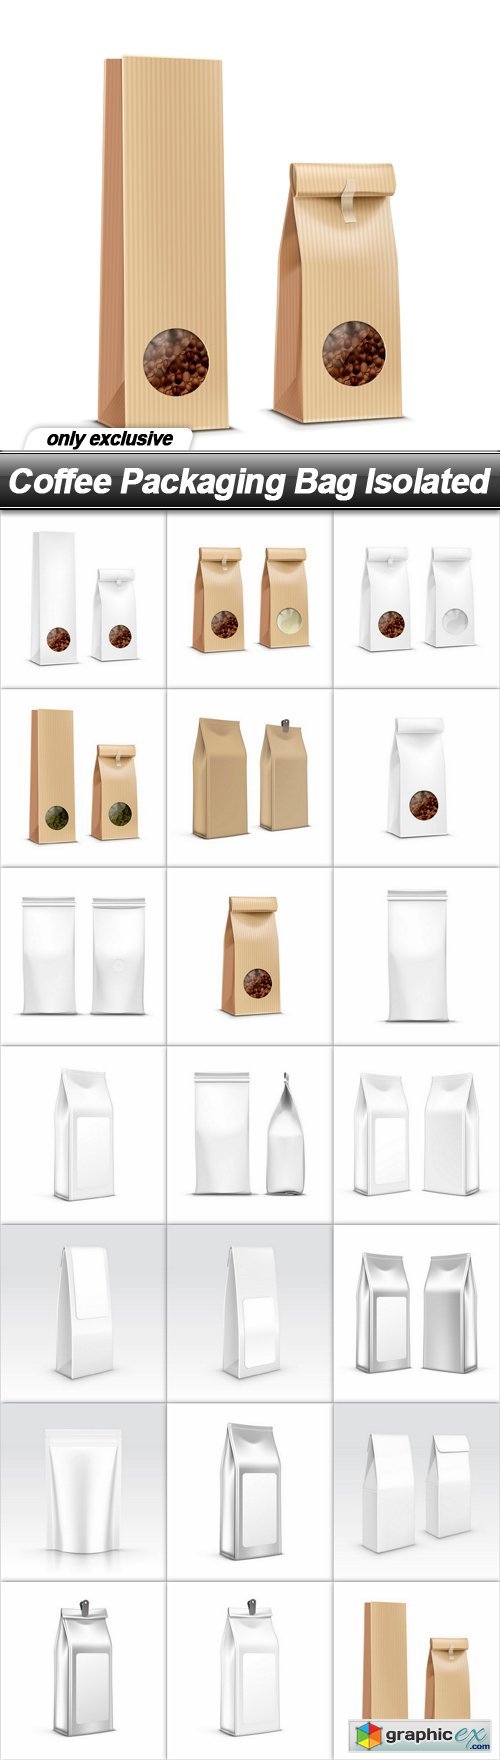 Coffee Packaging Bag Isolated - 22 EPS